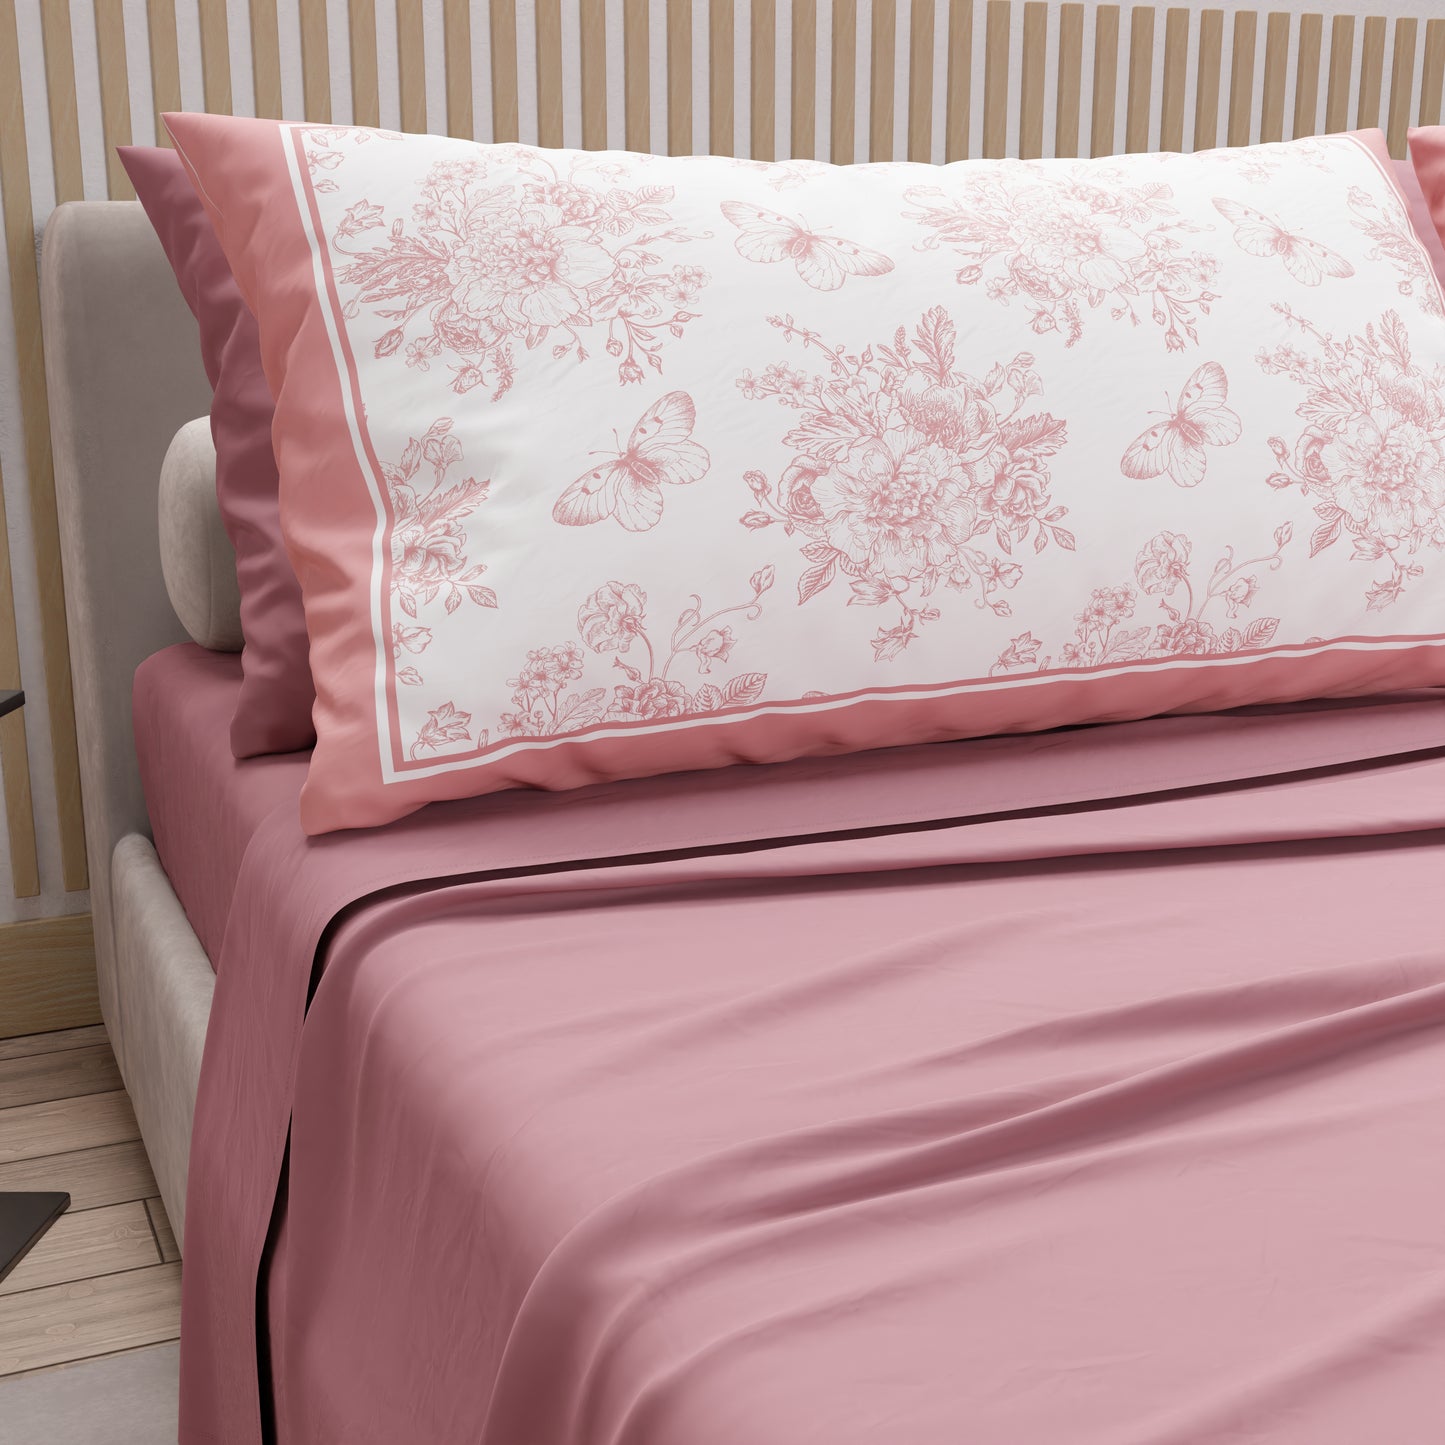 Cotton Sheets, Bed Set with Pink Botanical Digital Print Pillowcases